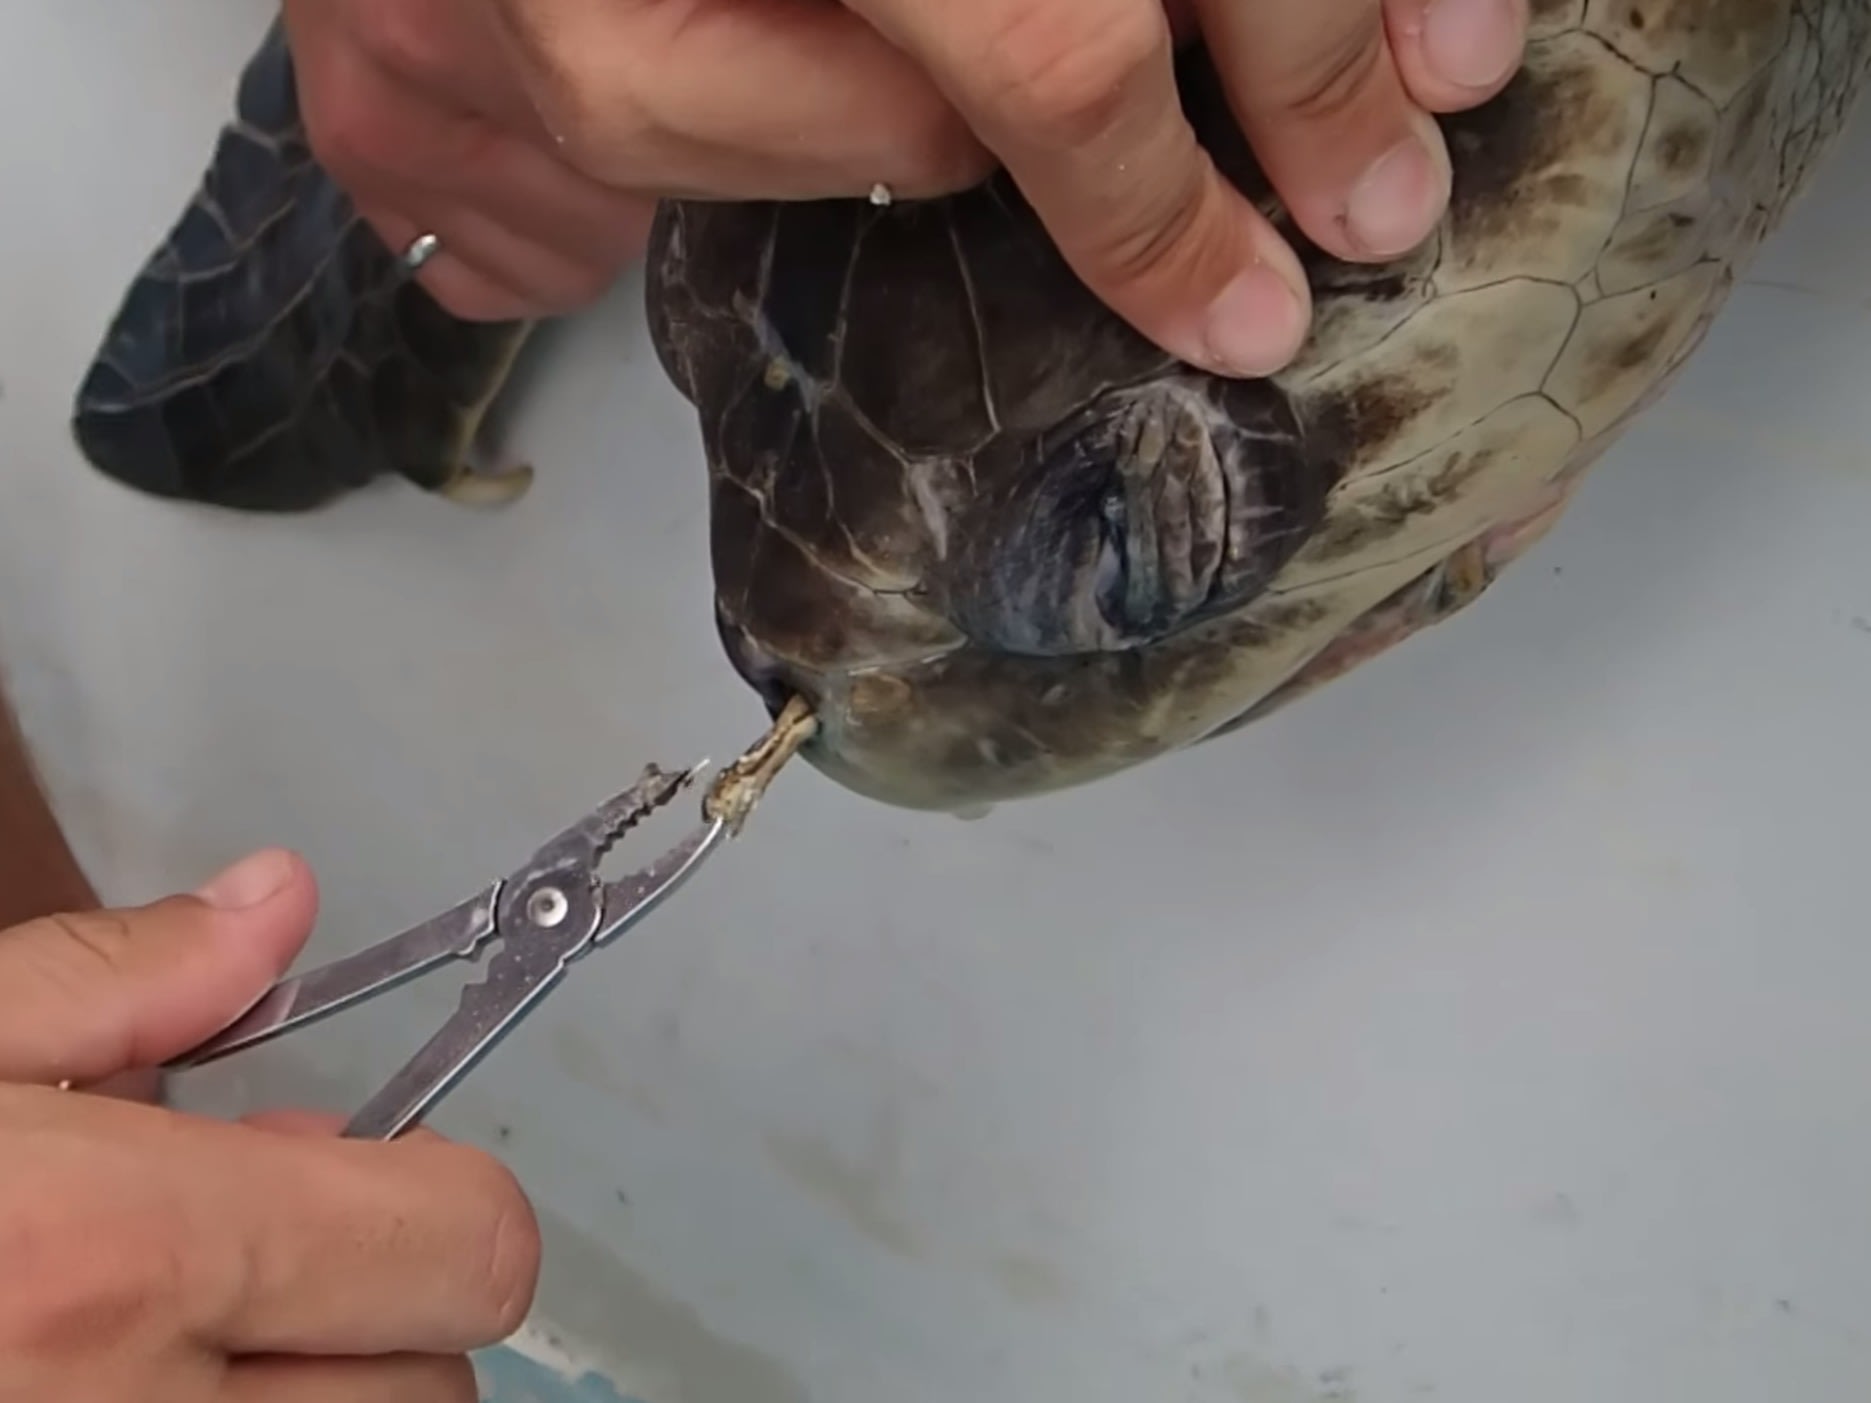 Biologists pulled something disturbing out of this turtle's nose that saved its life